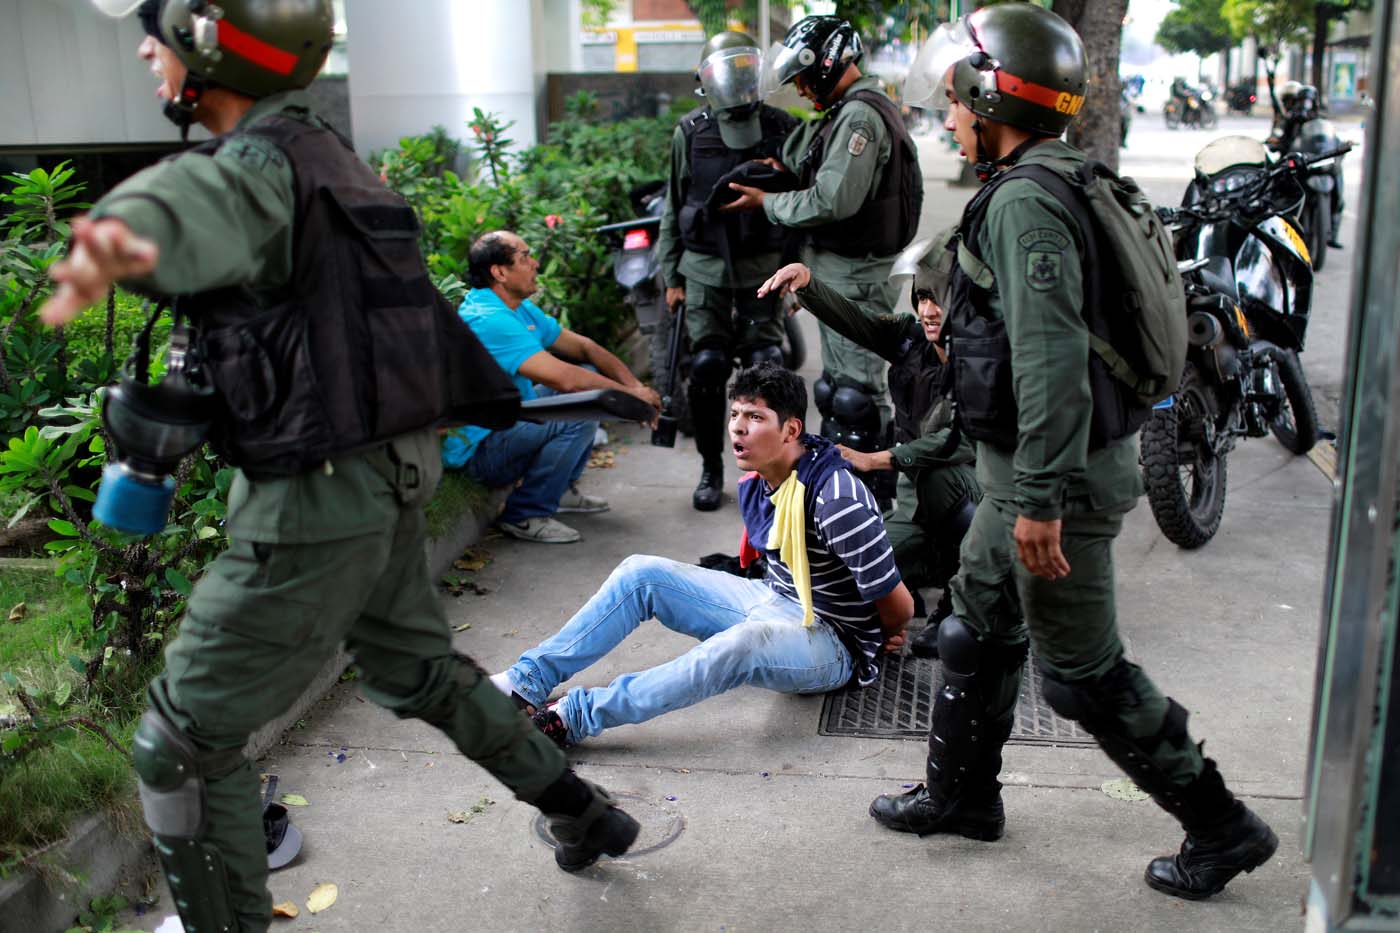 A demonstrator is detained at a rally during a strike called to protest against Venezuelan President Nicolas Maduro's government in Caracas, Venezuela July 27, 2017 . REUTERS/Marco Bello